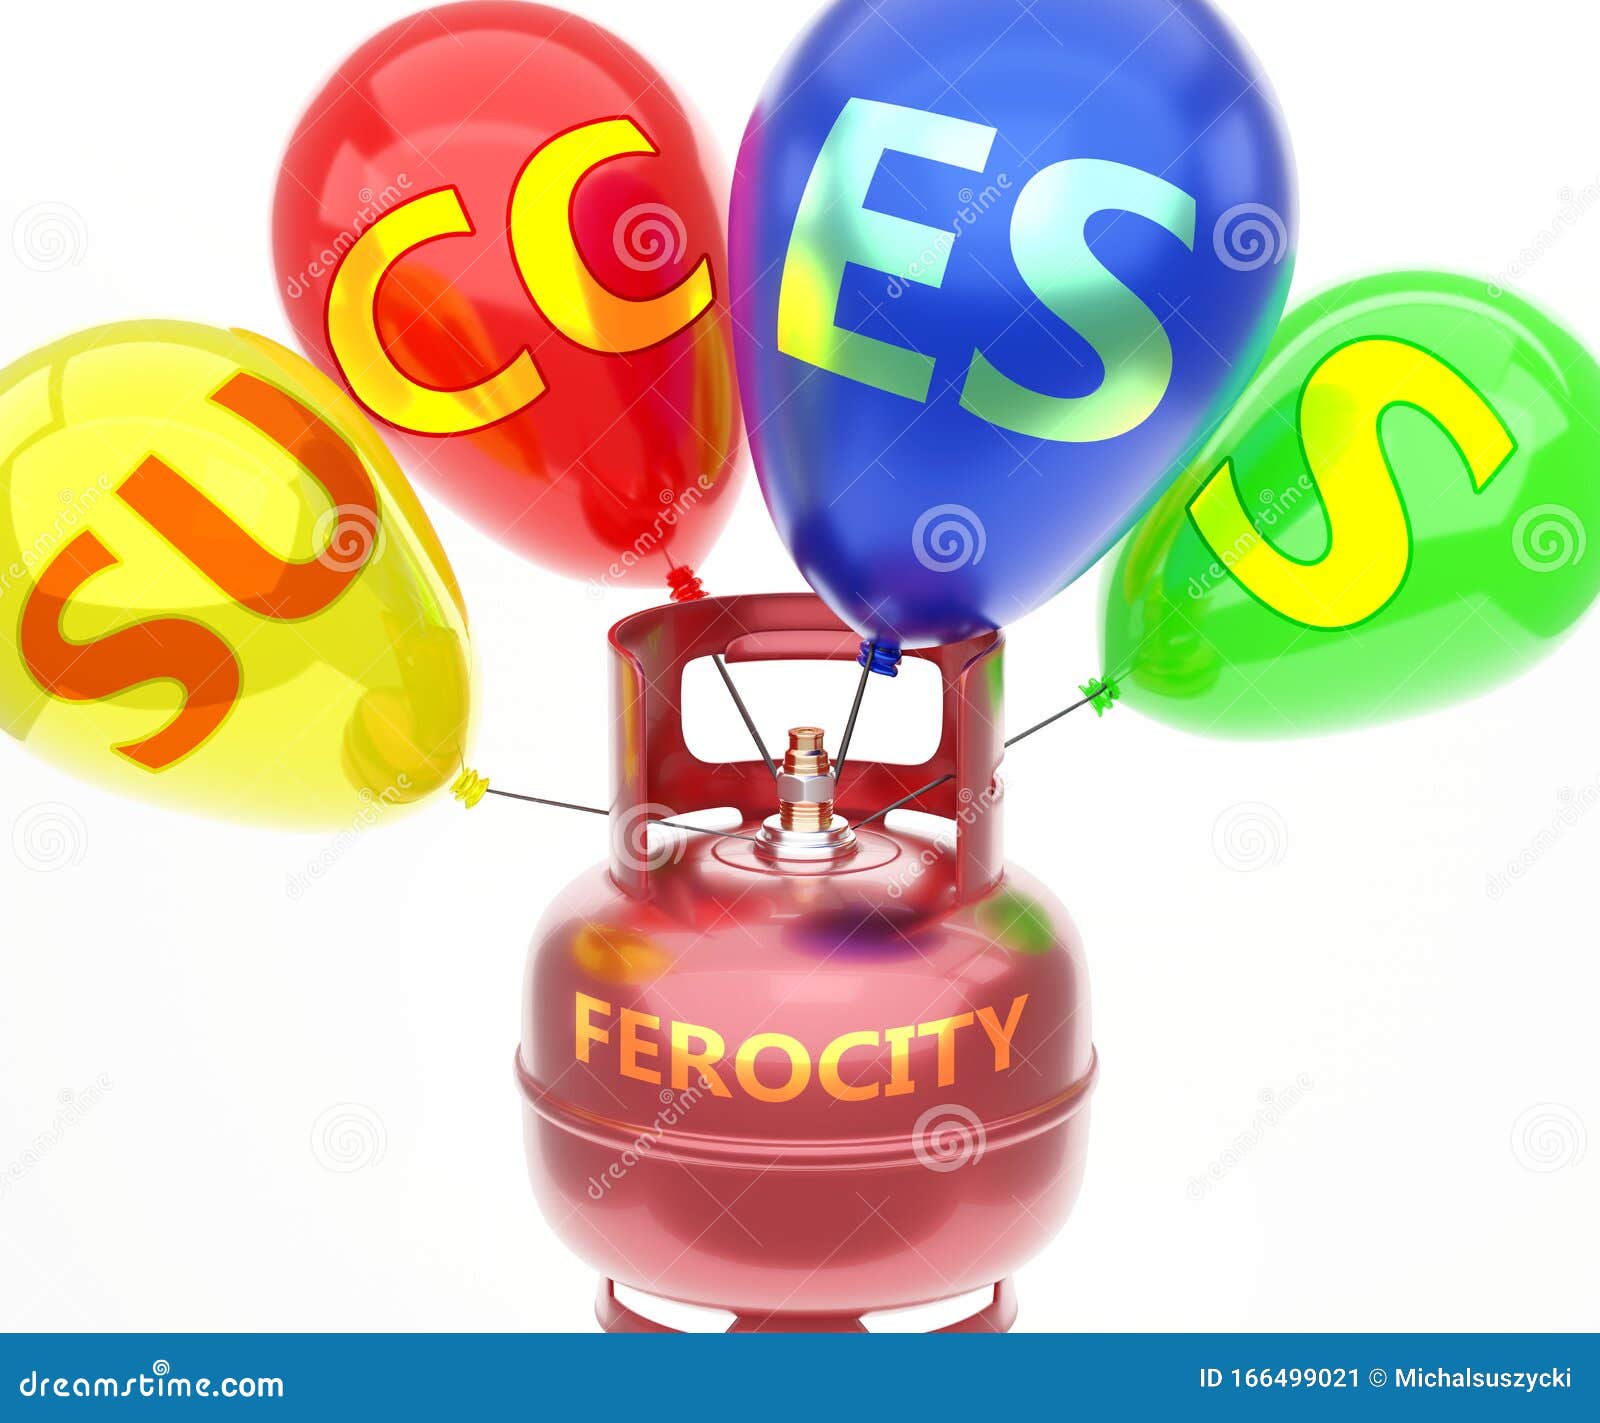 ferocity and success - pictured as word ferocity on a fuel tank and balloons, to ize that ferocity achieve success and